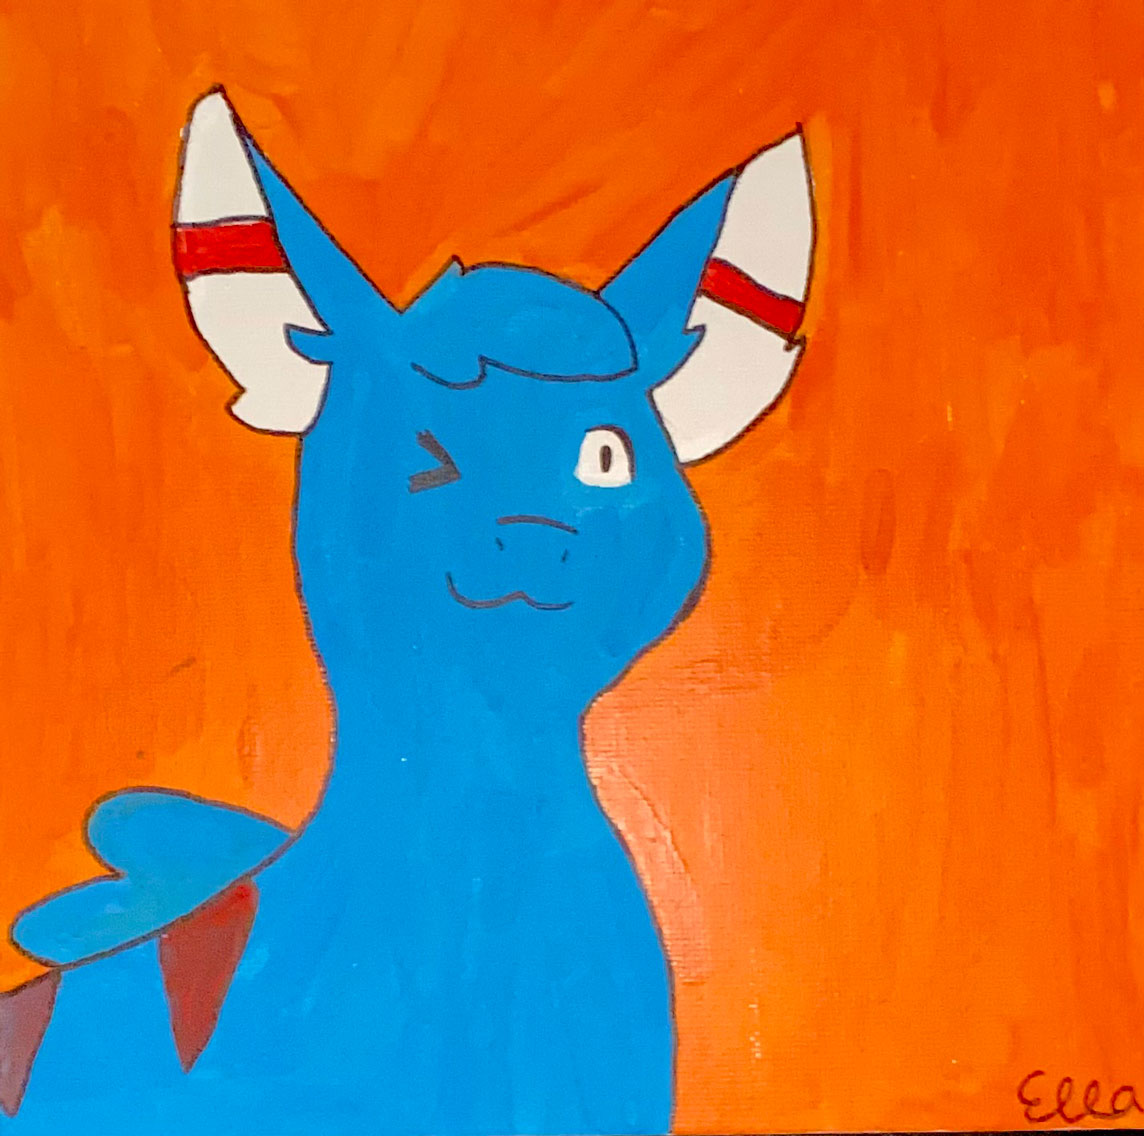 A colored drawing of some blue mythical creature.